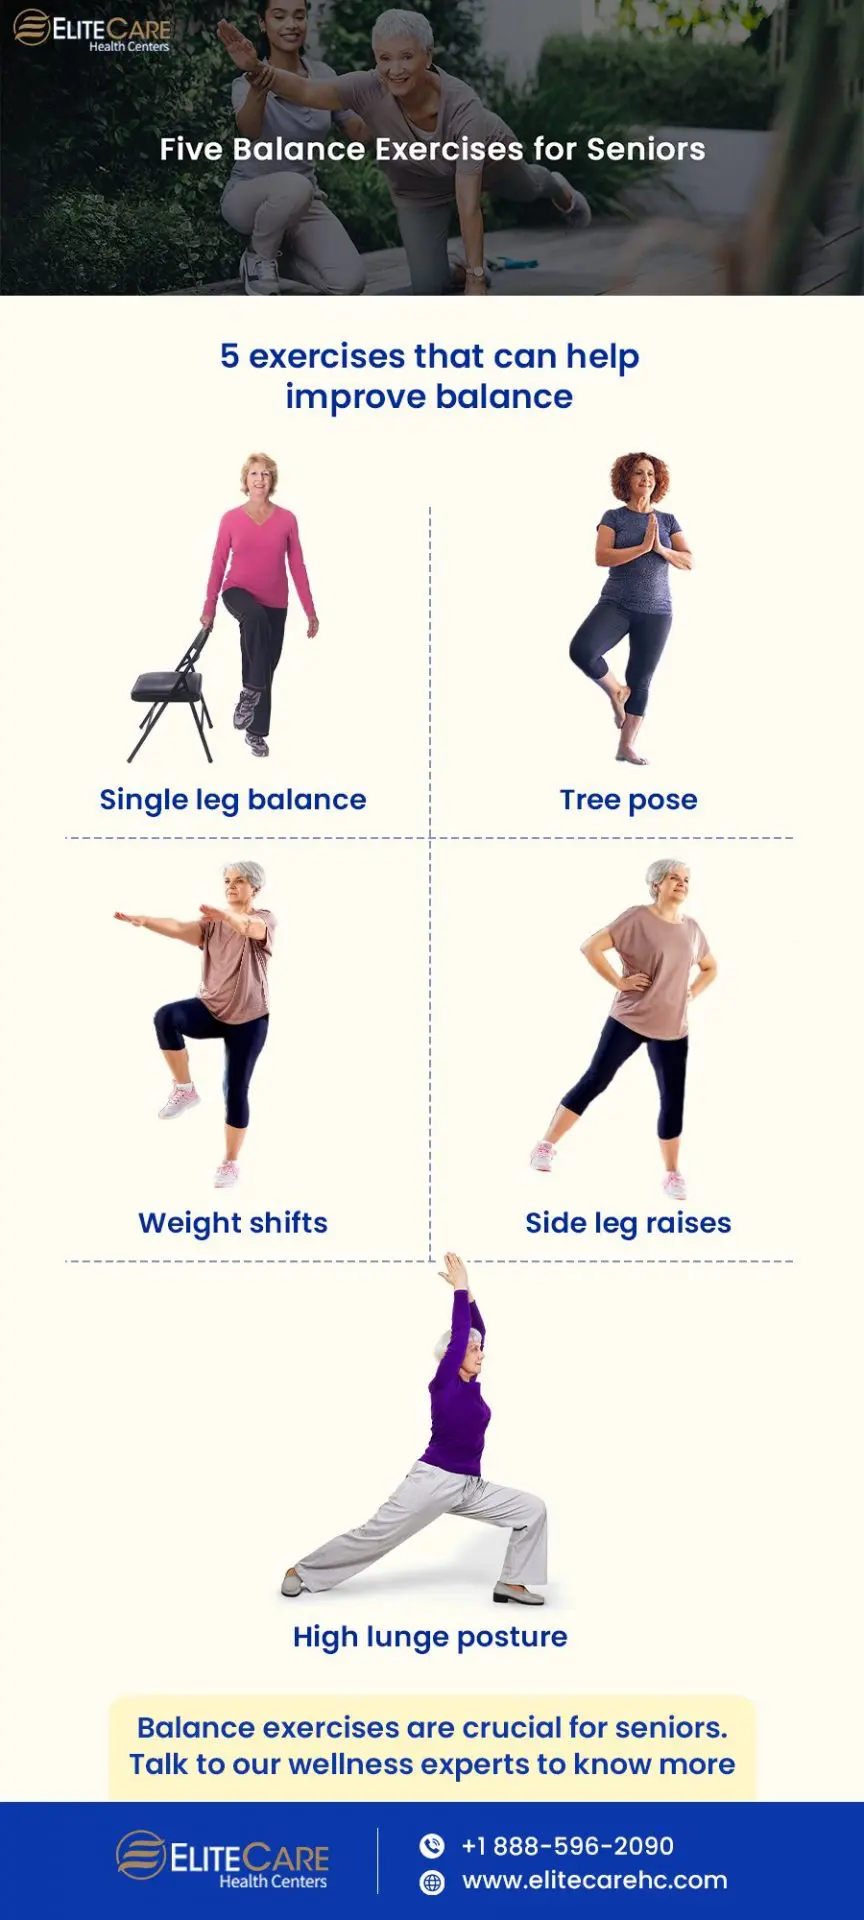 Five exercises that can enable seniors to stay balanced